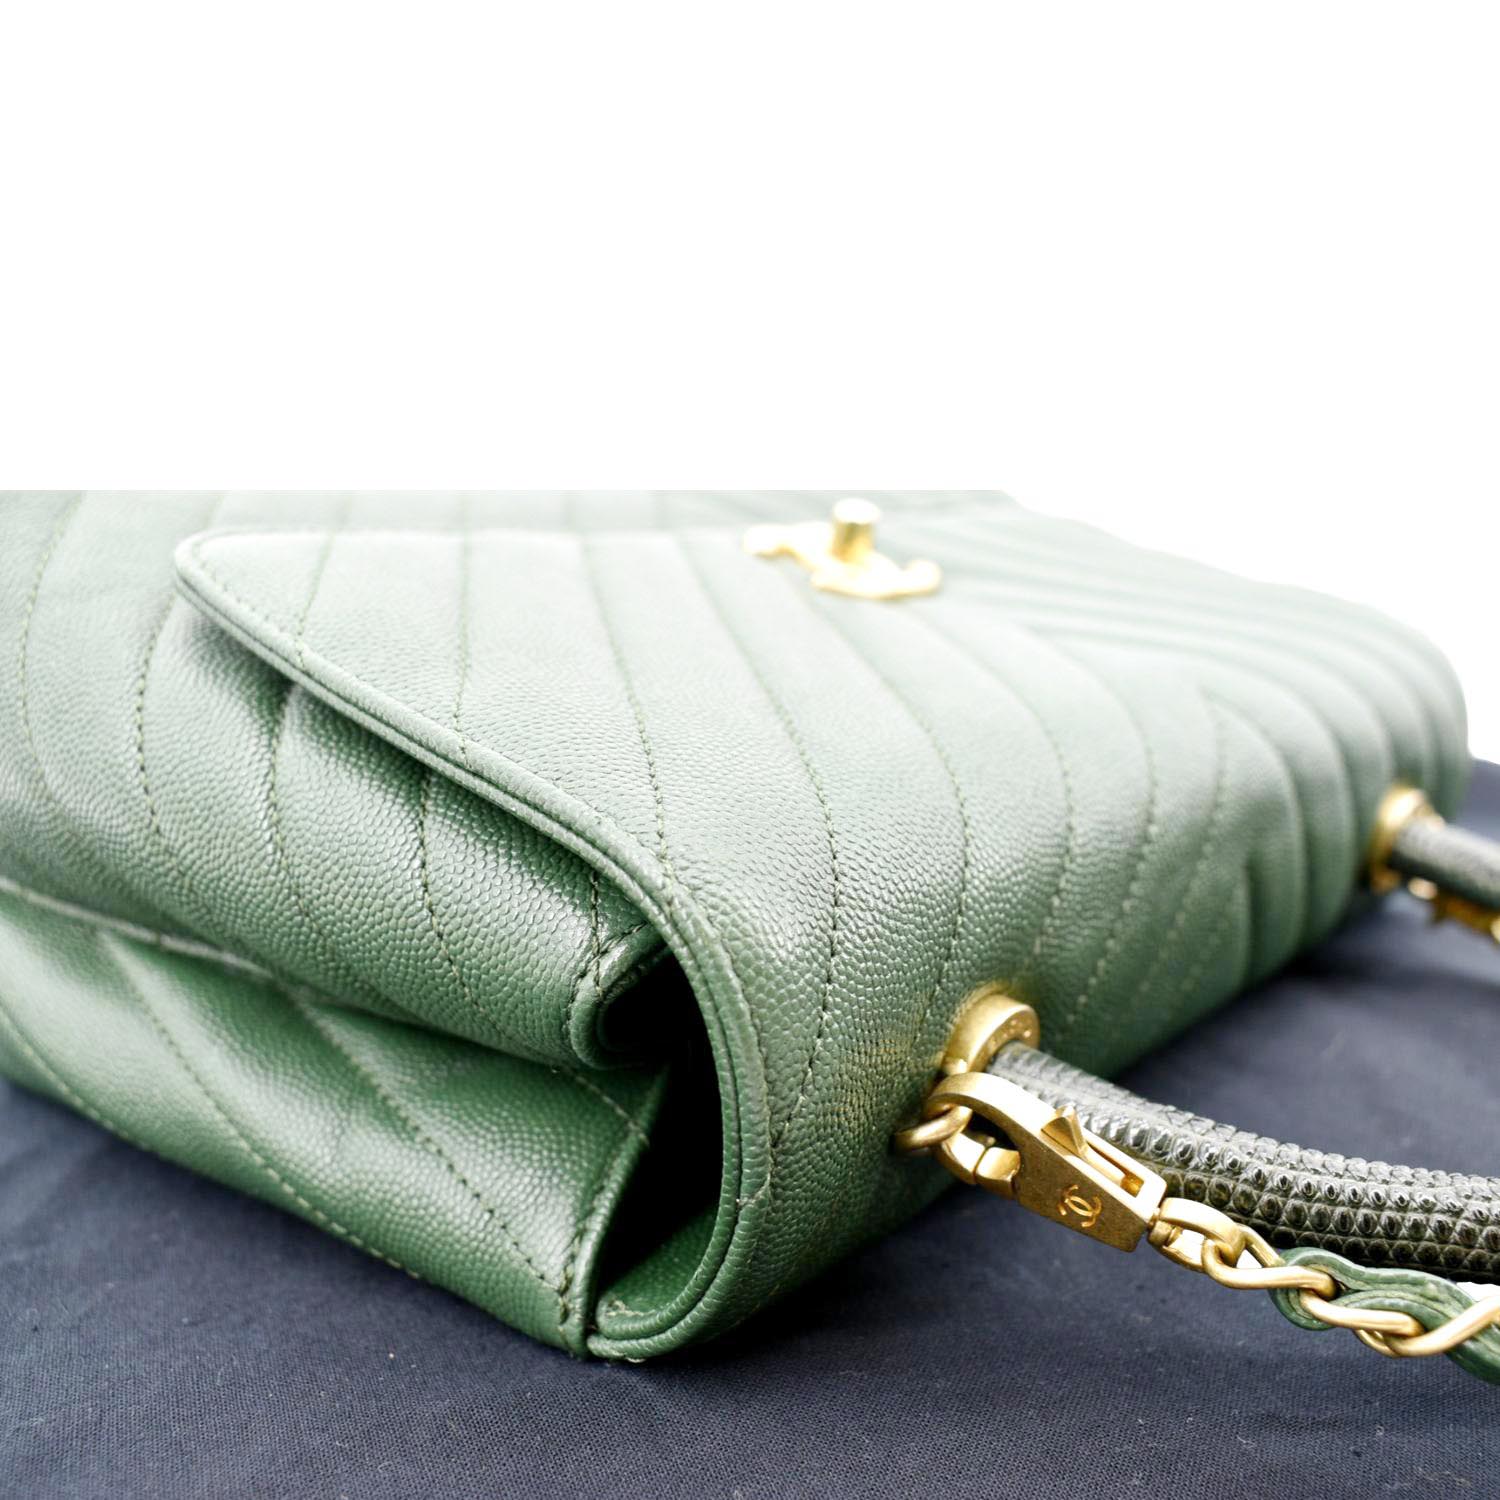 Vintage Chanel Flap Bags – Tagged Green